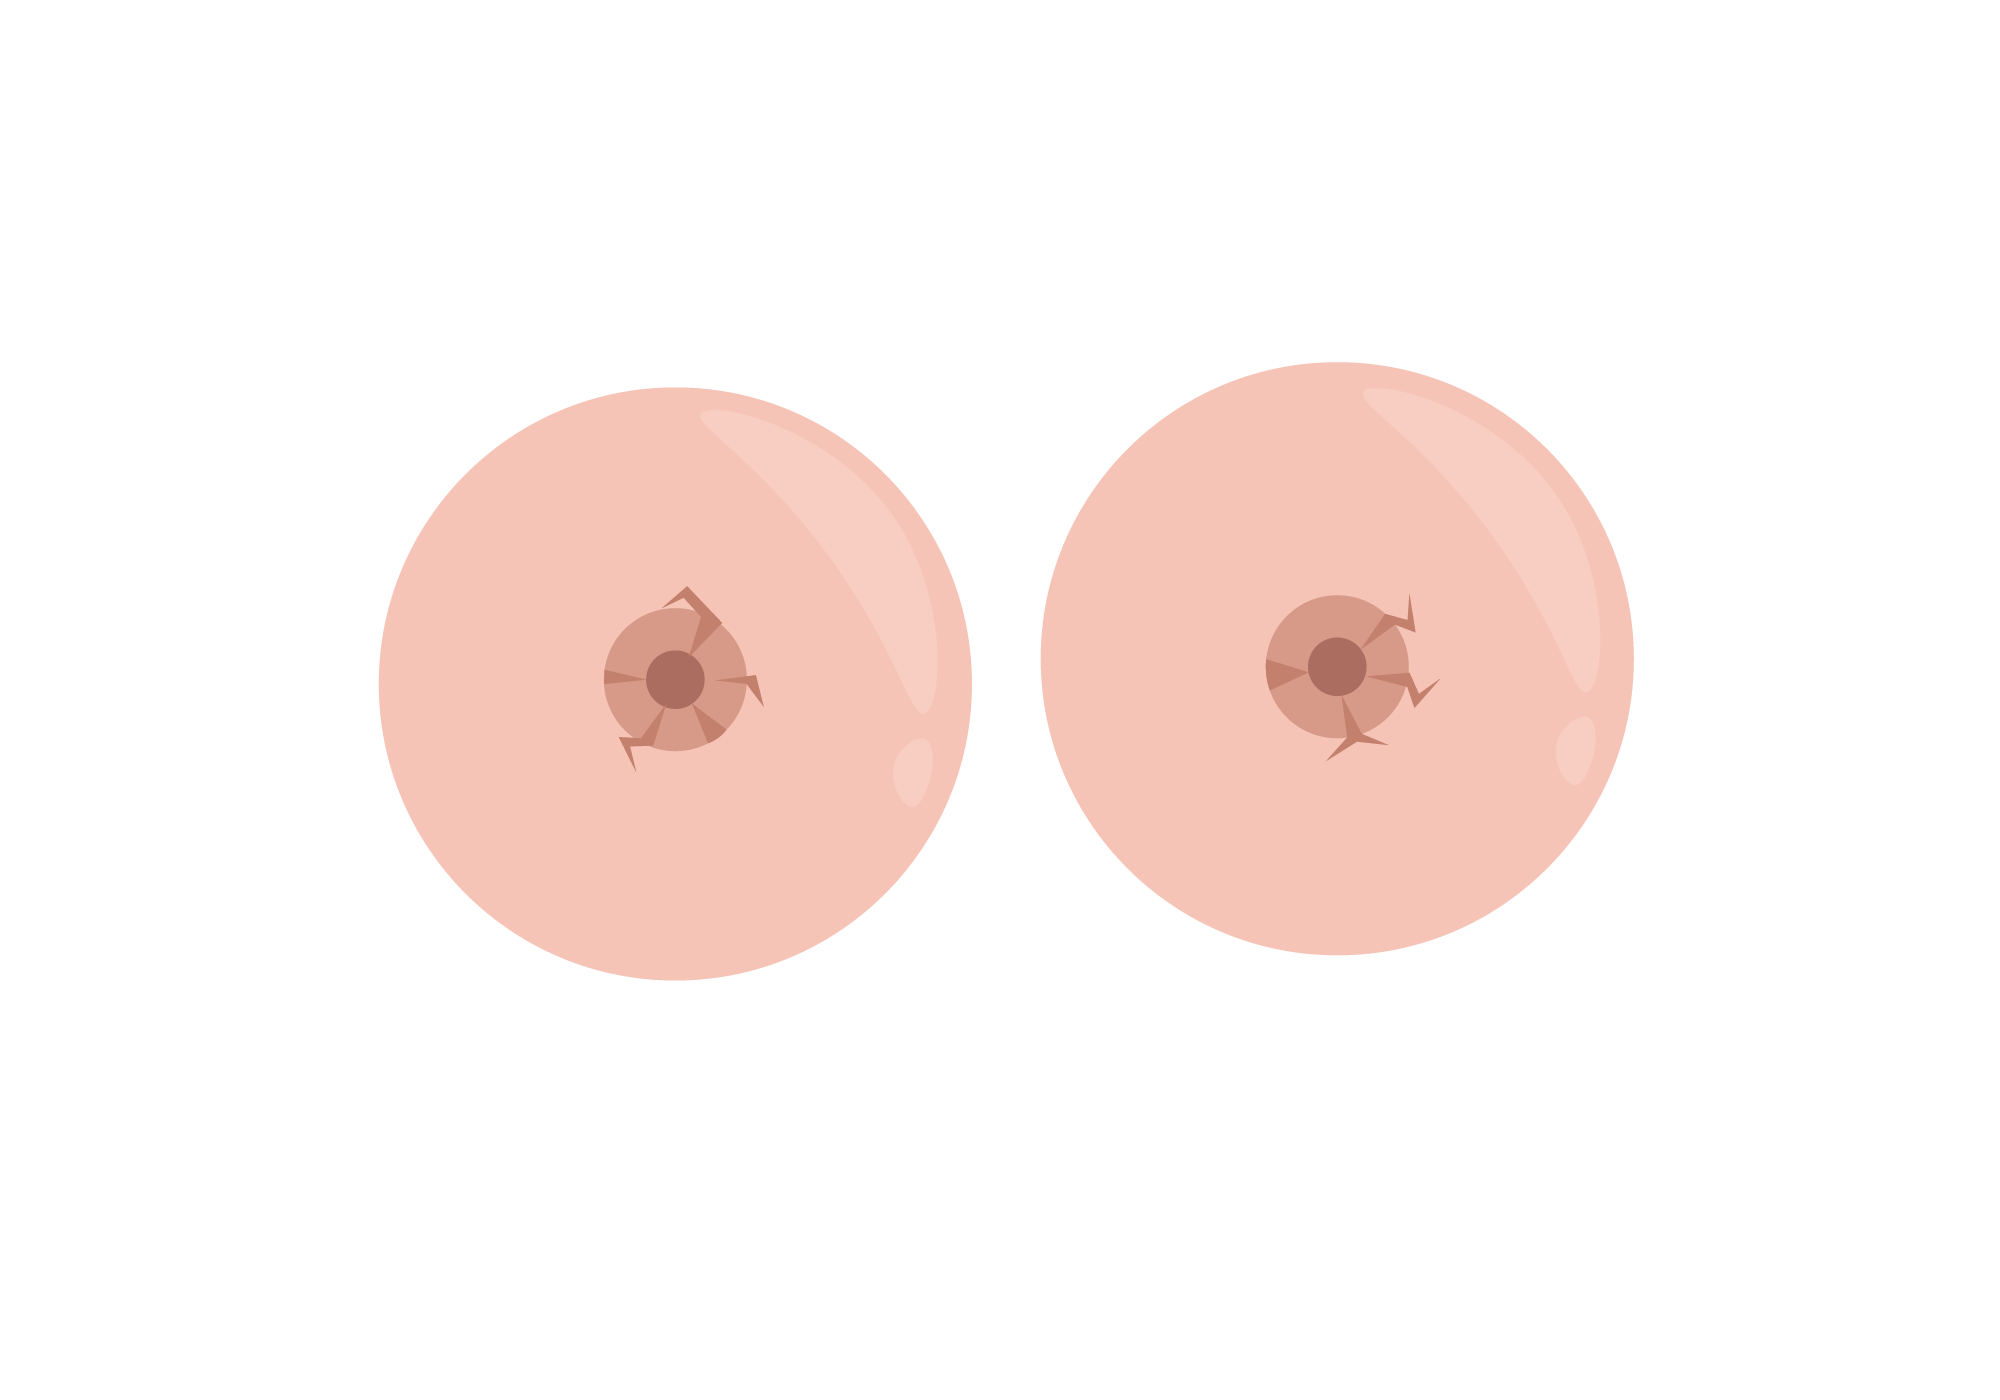 Itching breast, areola, nipple, bust: how do I get relief?